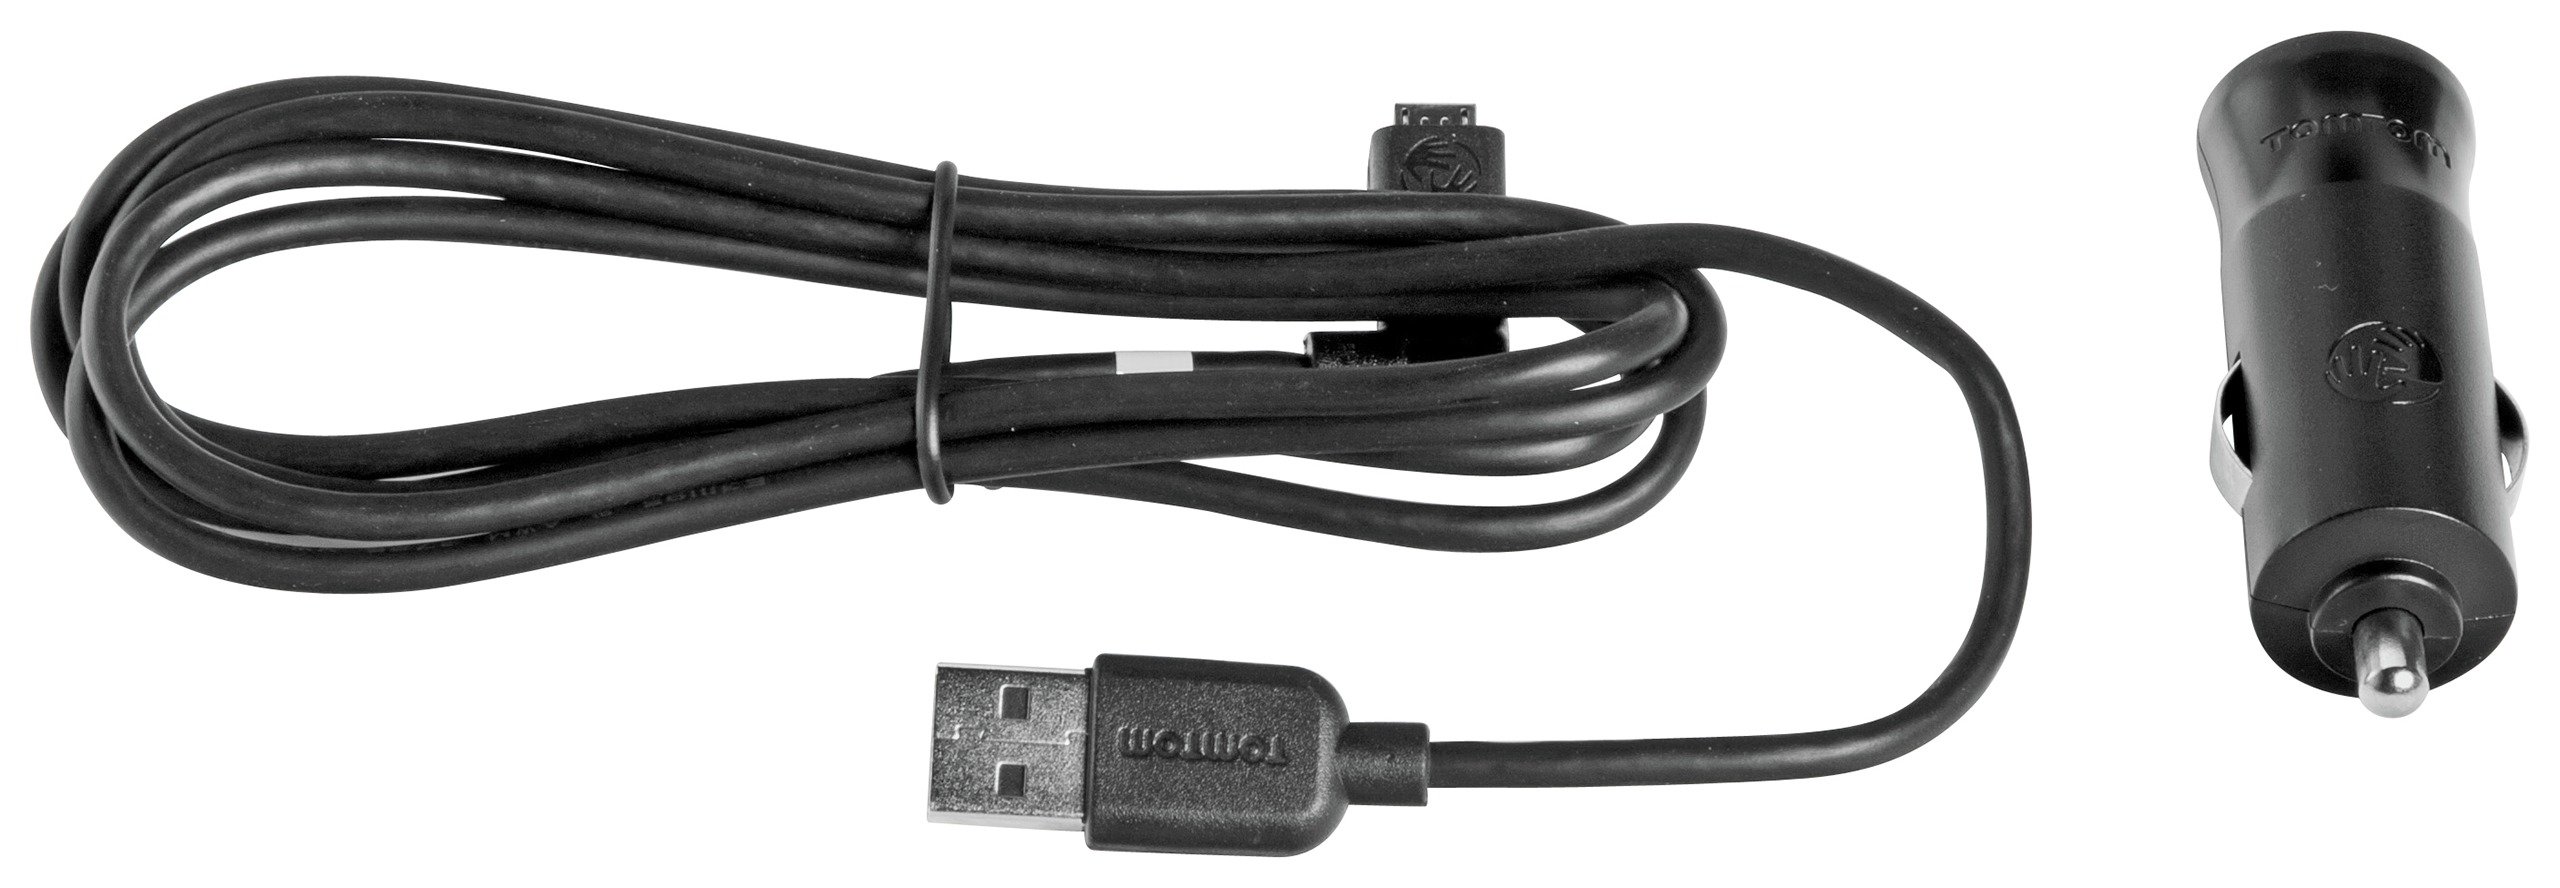 TomTom USB Charger